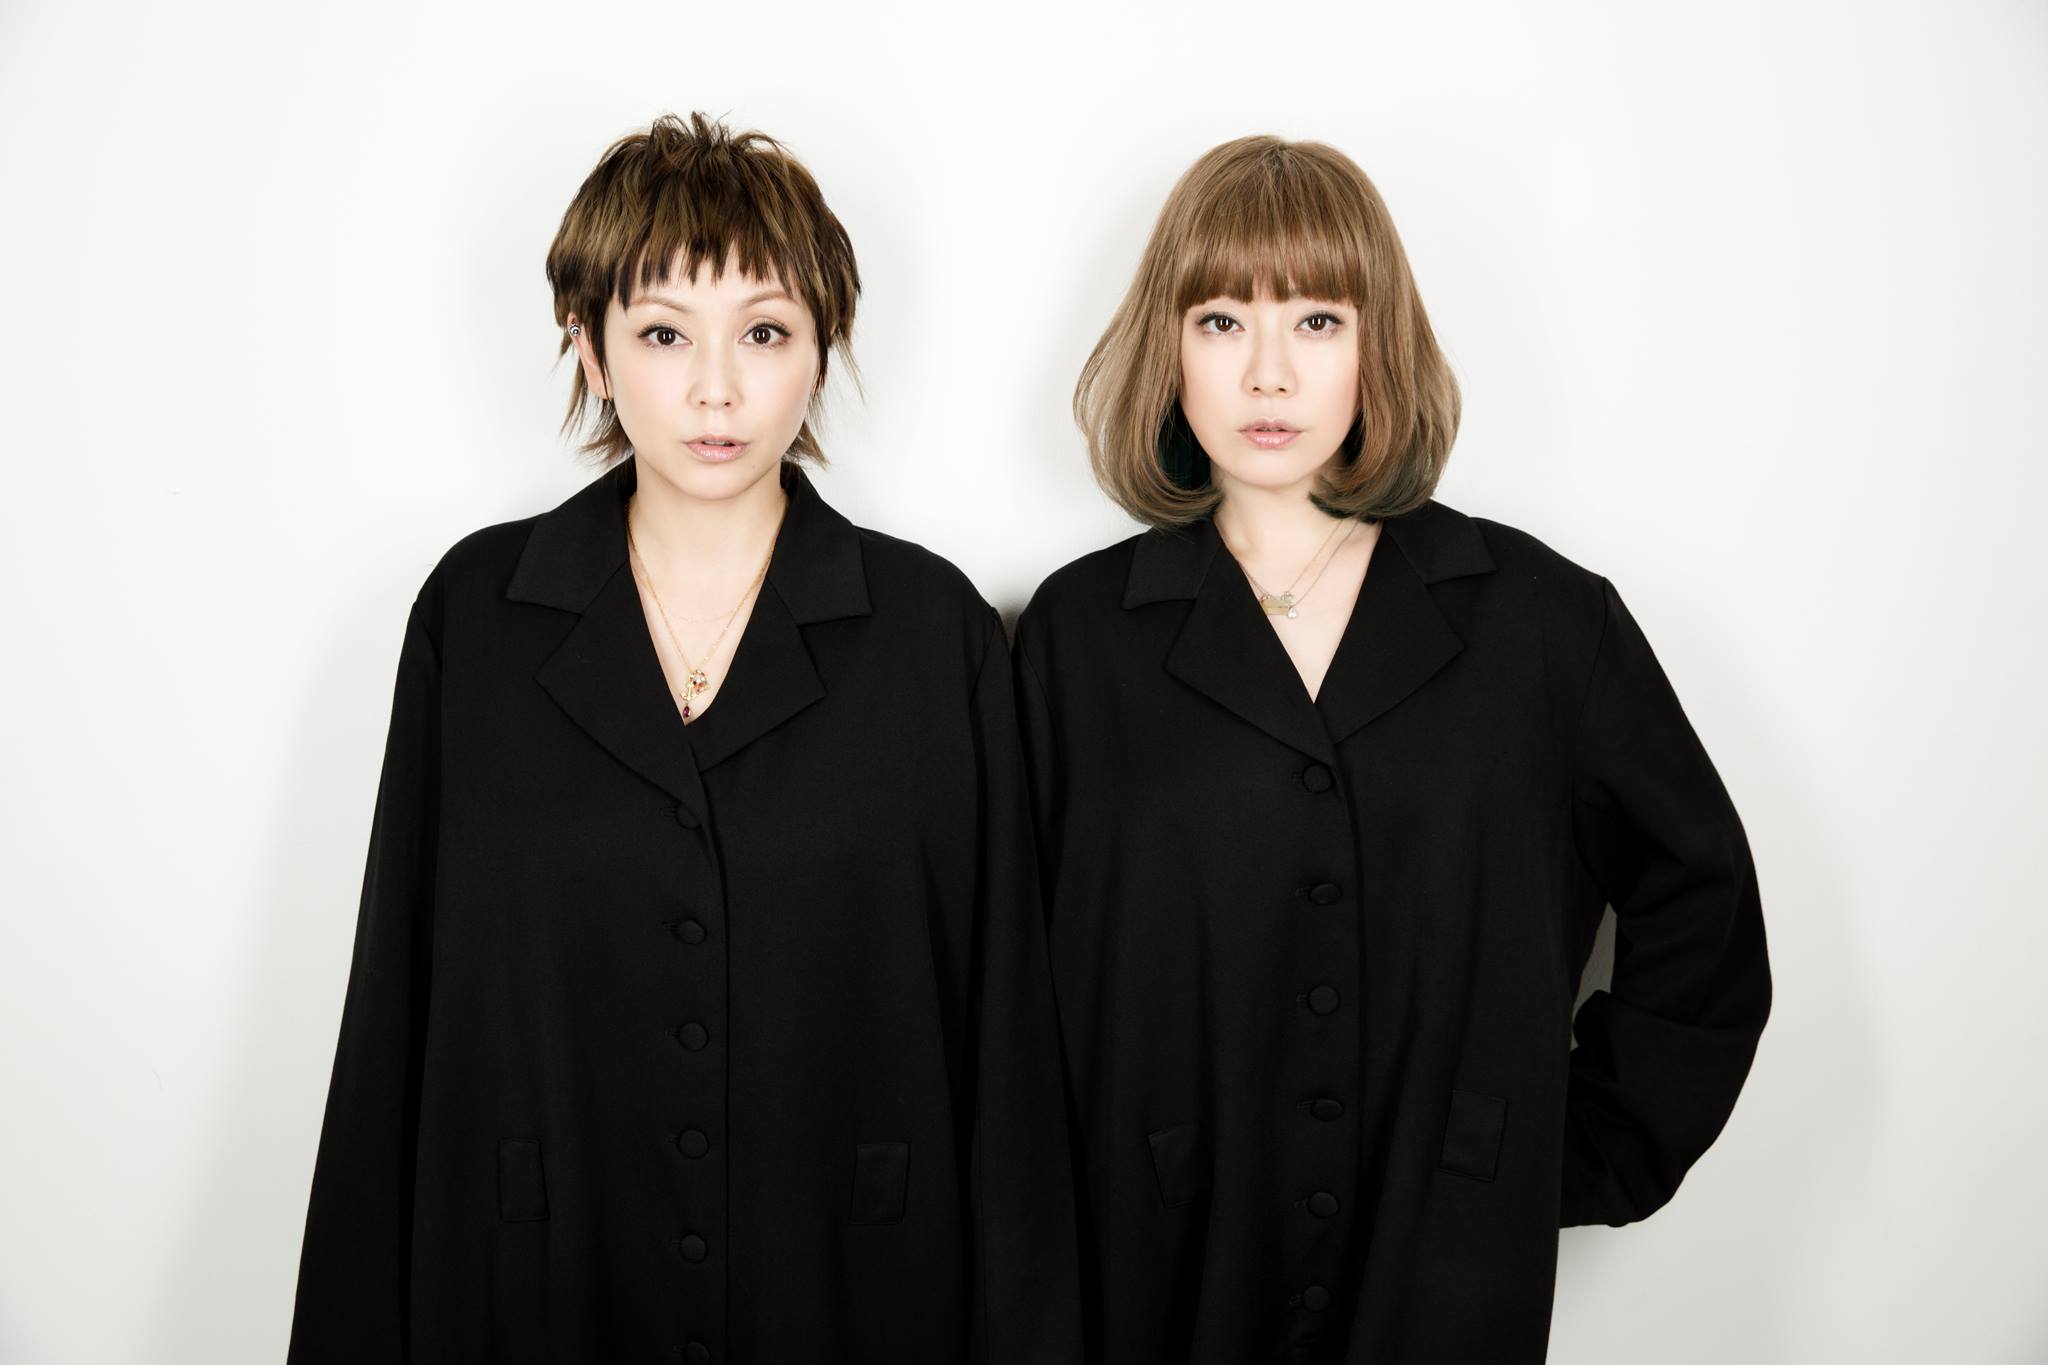 Puffy AmiYumi (Japan) to perform in the US this April – Hello Asia!